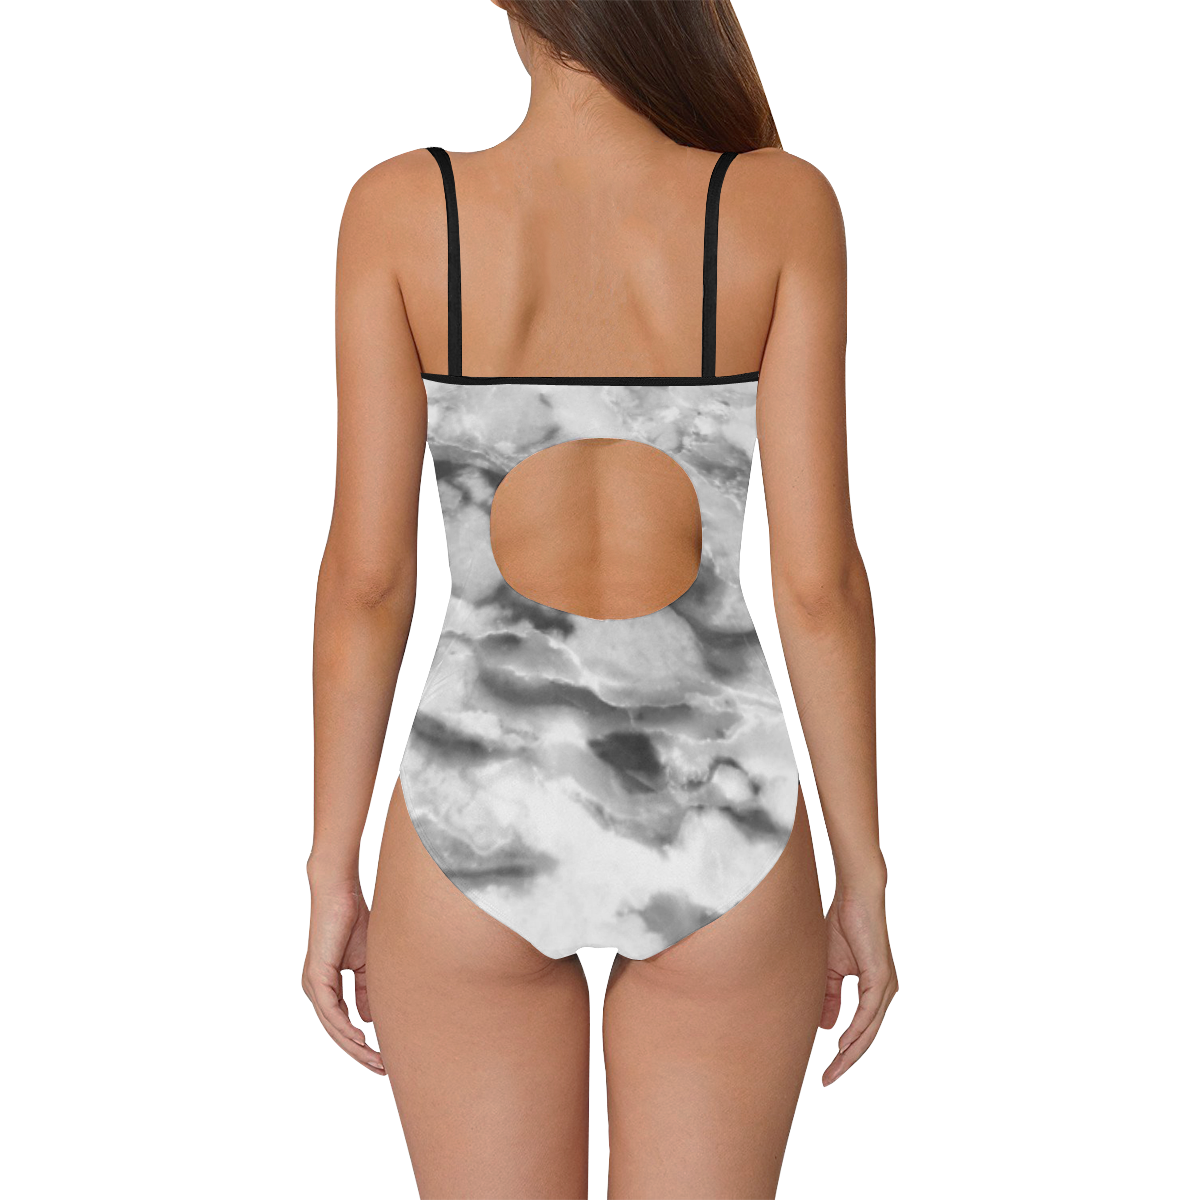 Marble Black and White Pattern Strap Swimsuit ( Model S05)